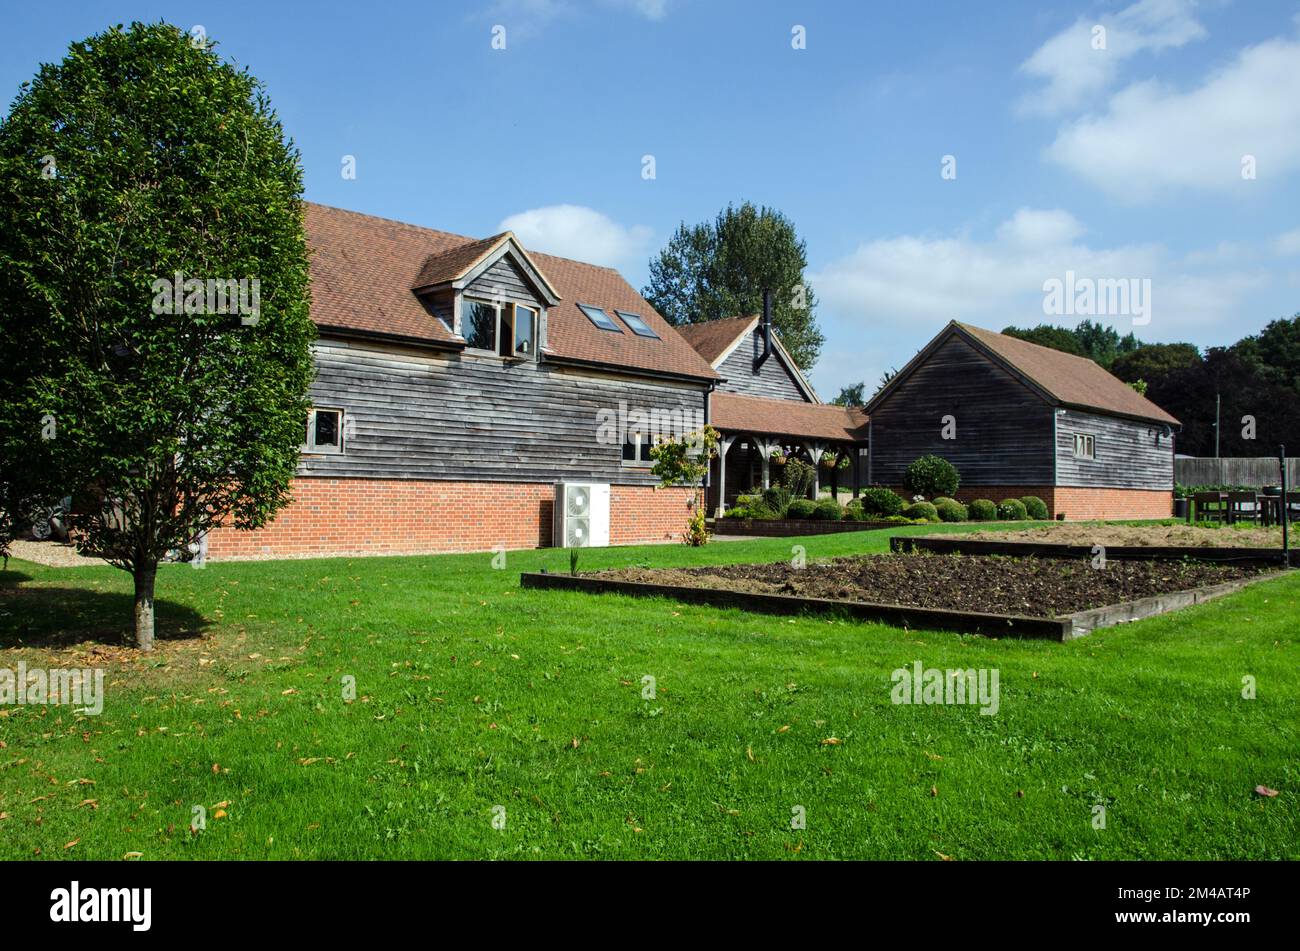 Hampshire, UK - September 15, 2021: Traditional barns converted to classrooms for the Honesty Kitchen Cookery School in North Sydmonton, Hampshire.  T Stock Photo